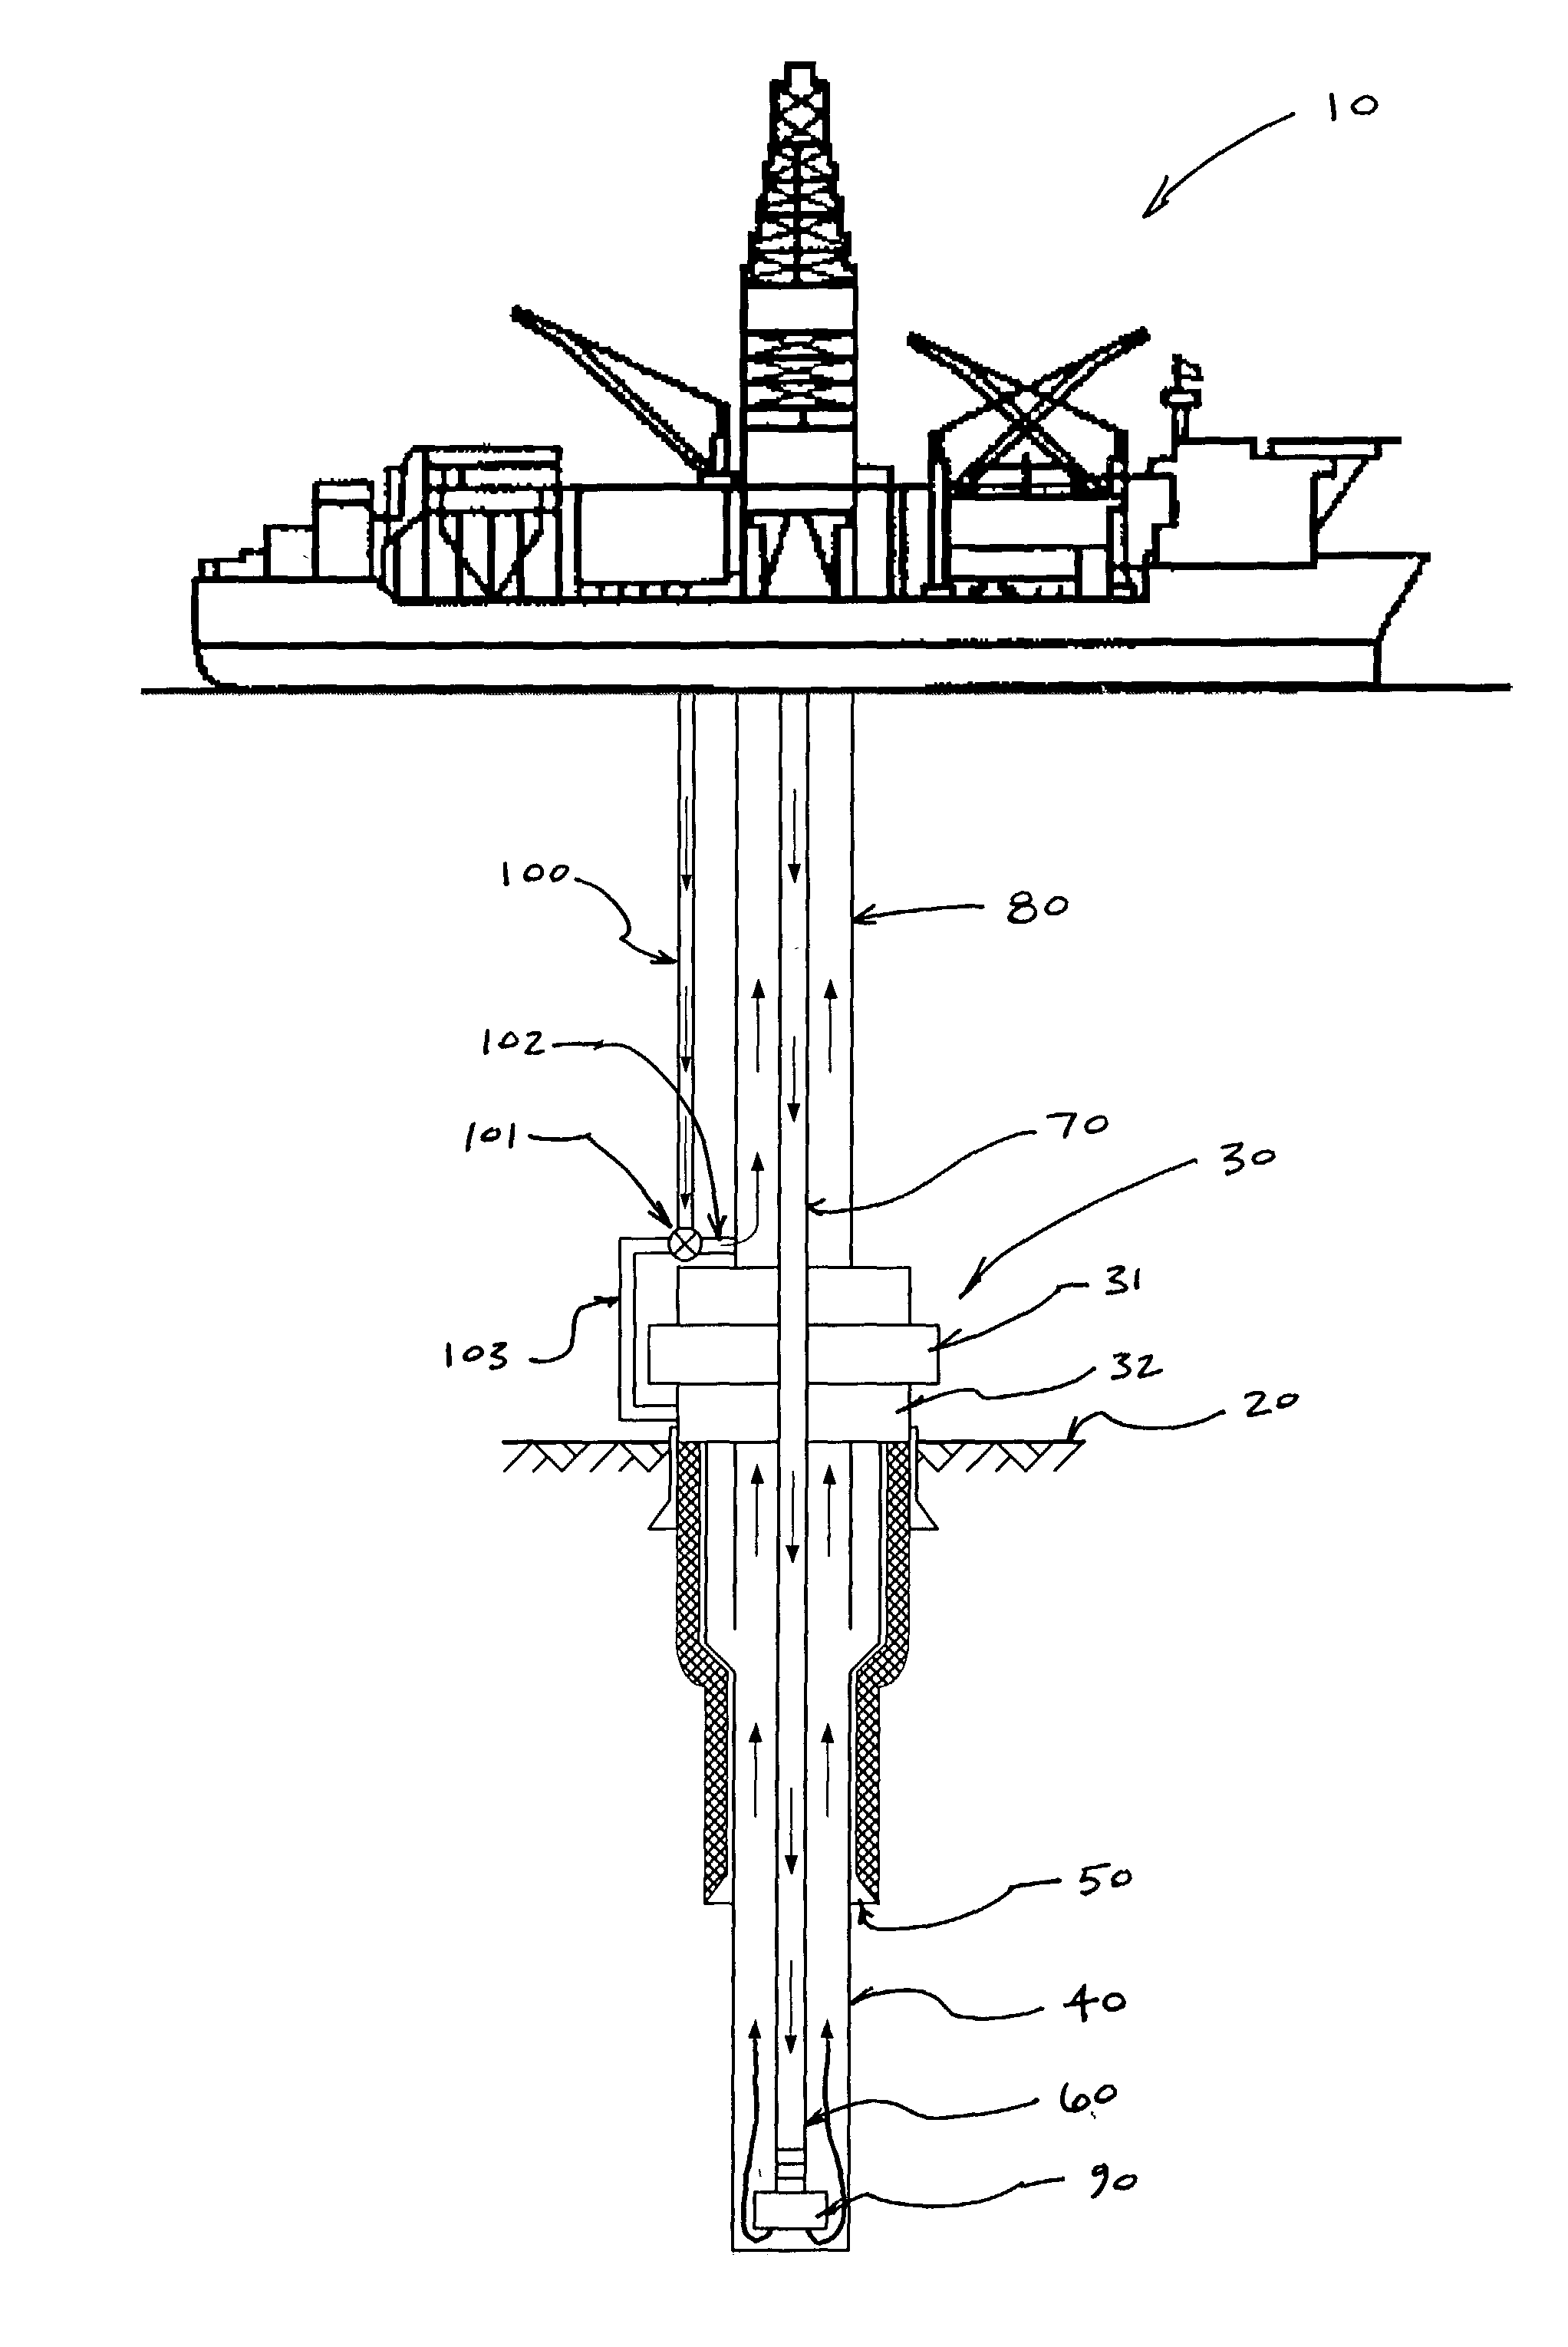 Method and apparatus for varying the density of drilling fluids in deep water oil drilling applications